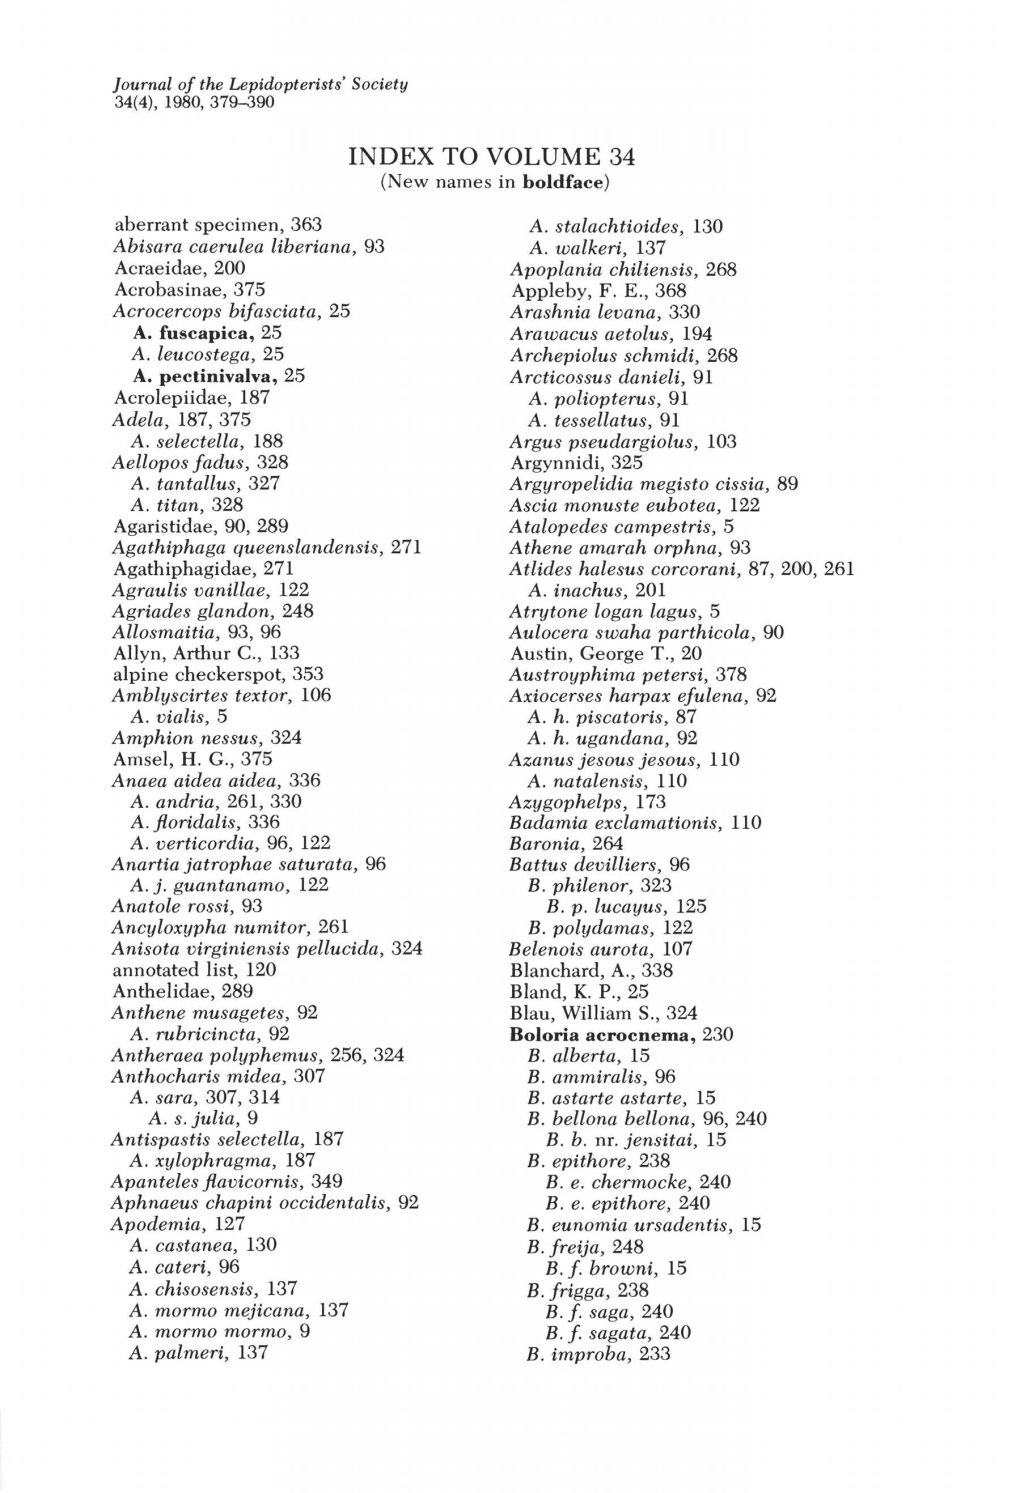 INDEX to VOLUME 34 (New Names in Boldface) Aberrant Specimen, 363 A